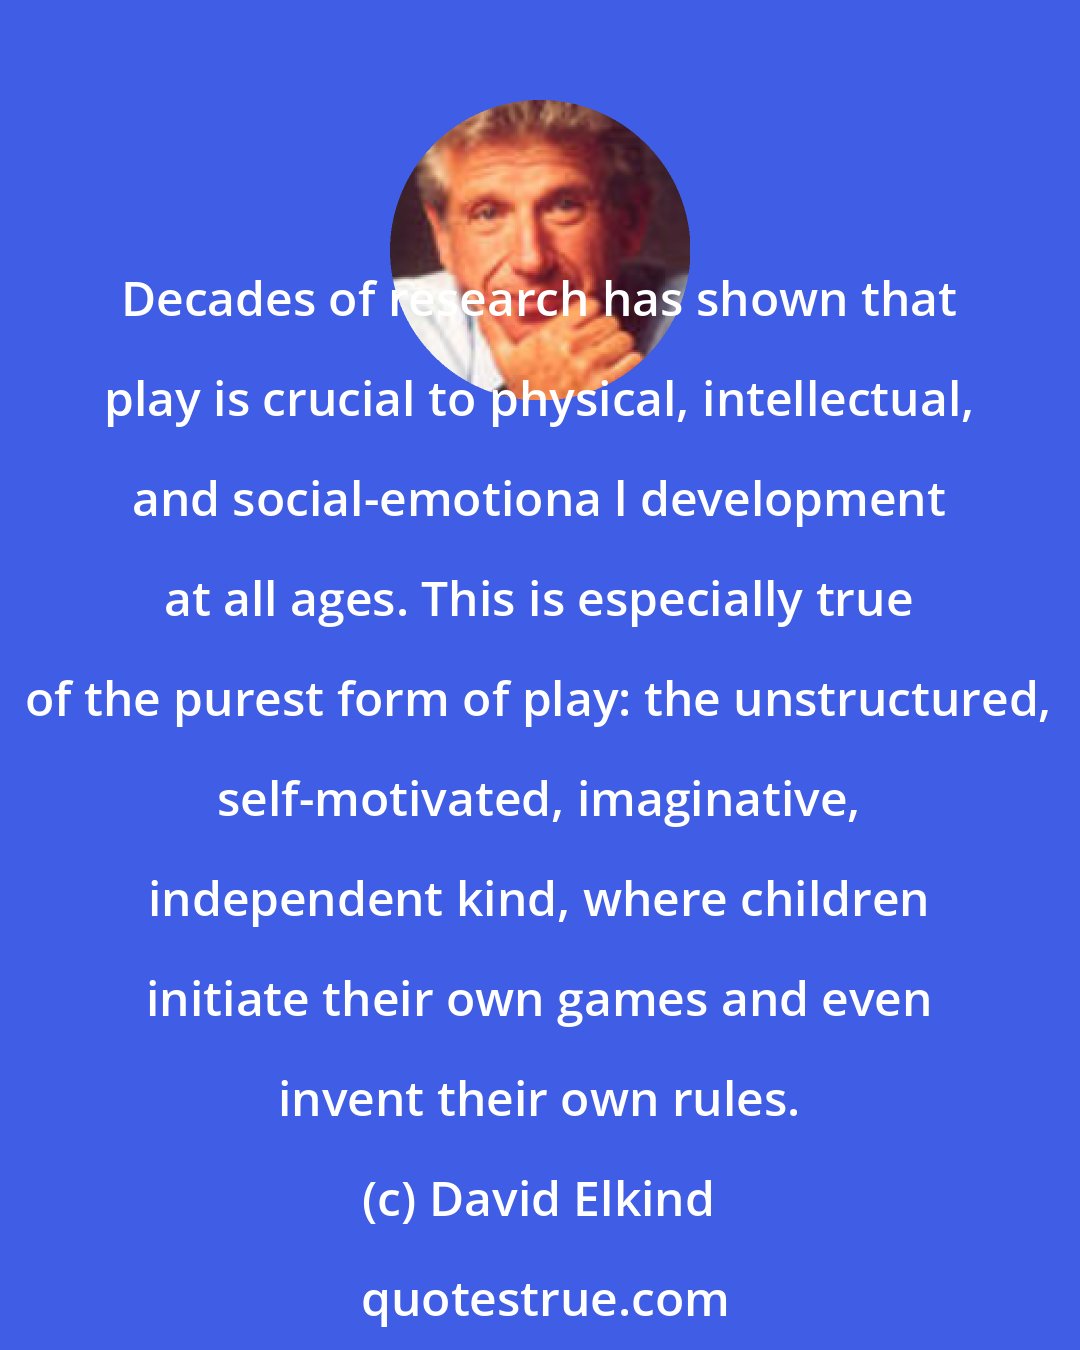 David Elkind: Decades of research has shown that play is crucial to physical, intellectual, and social-emotiona l development at all ages. This is especially true of the purest form of play: the unstructured, self-motivated, imaginative, independent kind, where children initiate their own games and even invent their own rules.